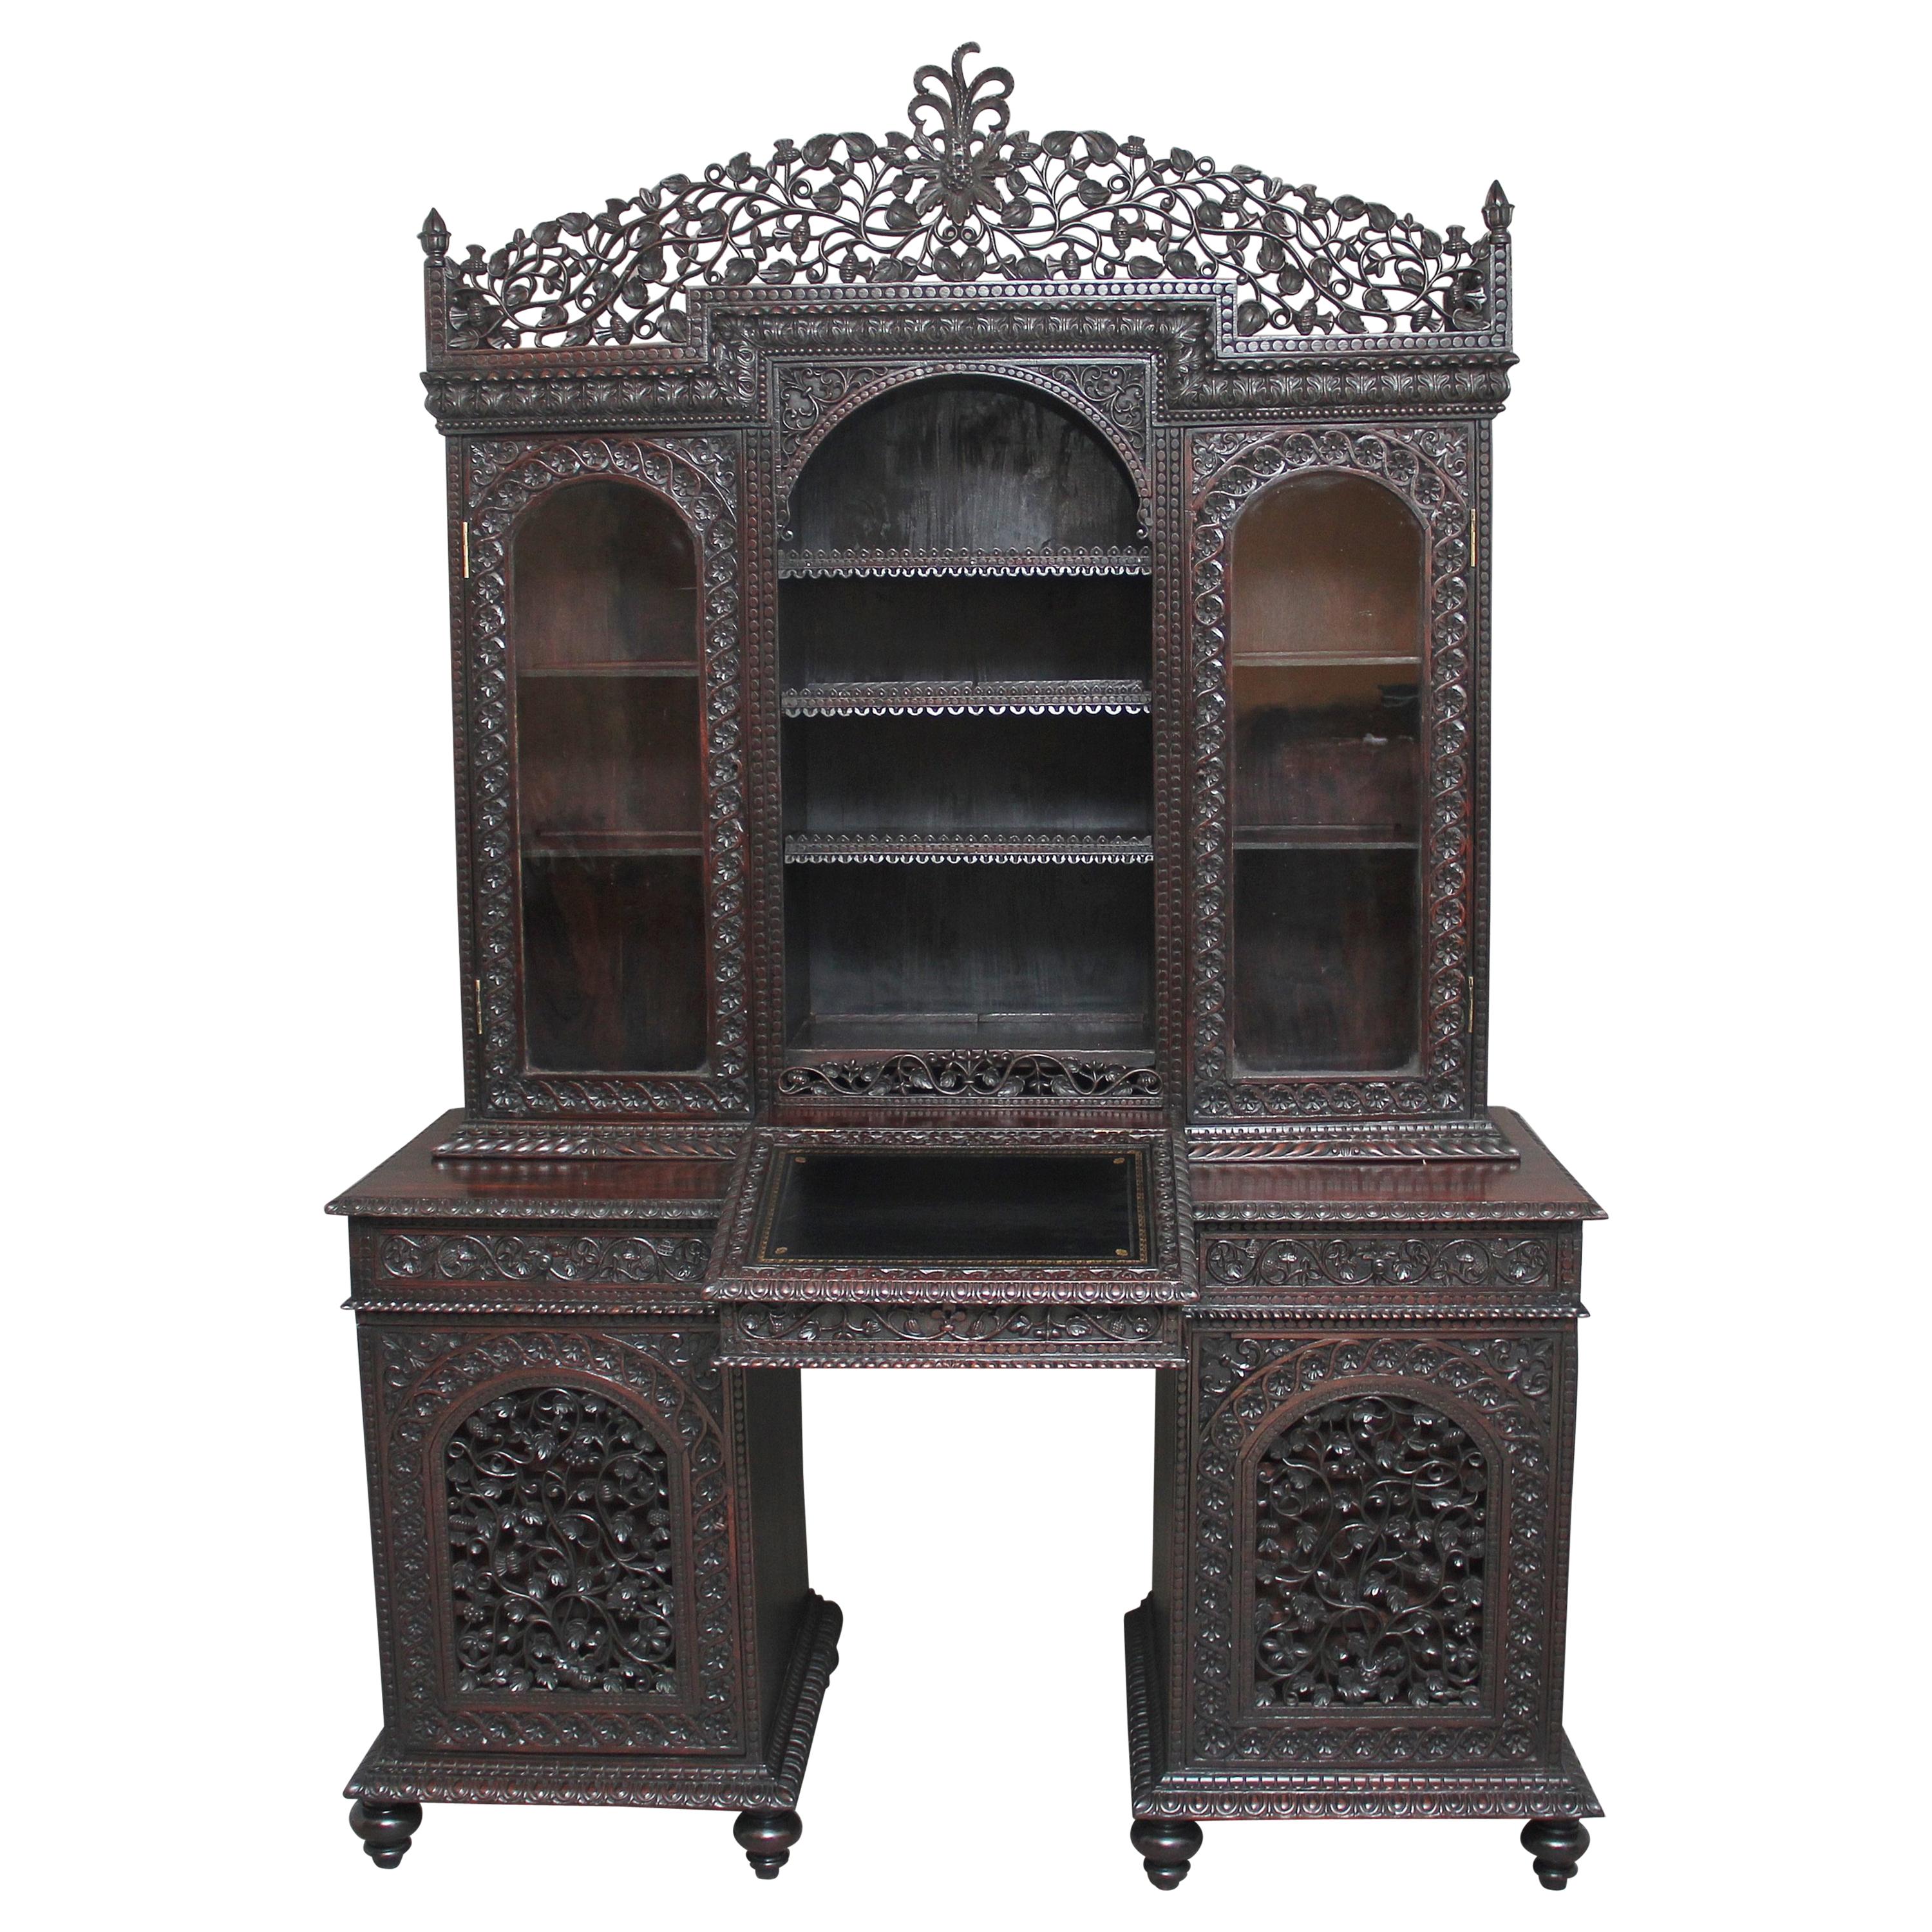 19th Century Anglo-Indian bookcase